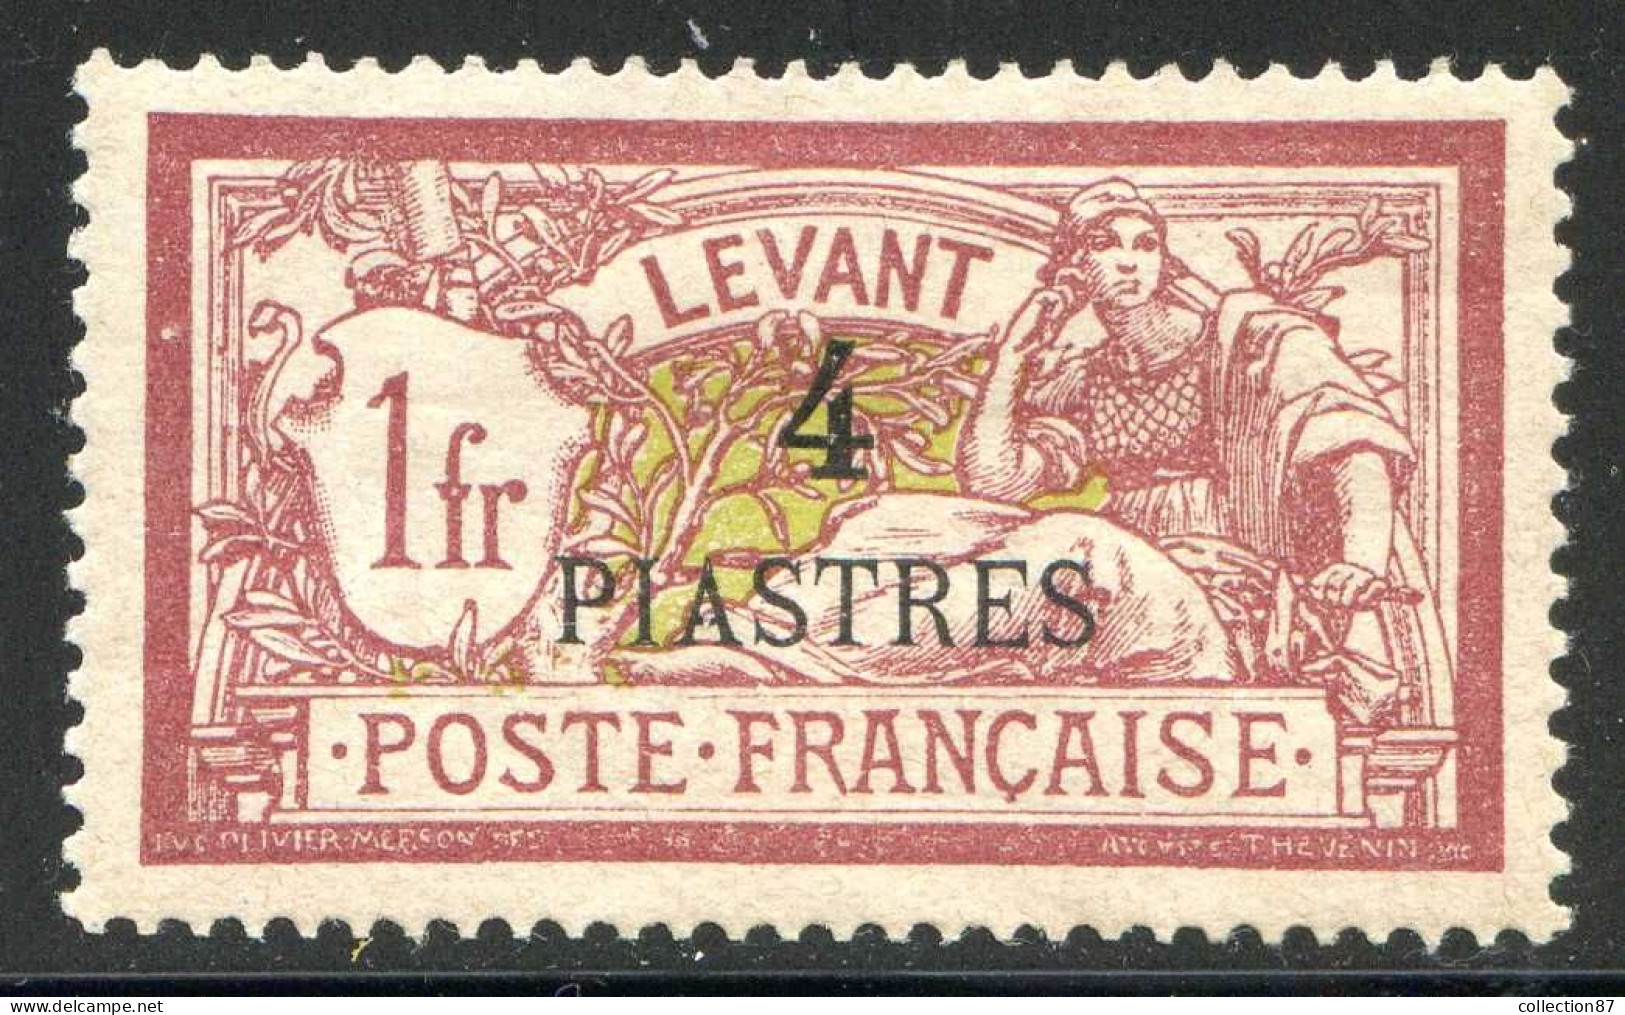 REF 087 > LEVANT < N° 21 * Superbe Centrage < Neuf Ch - MH * - Unused Stamps